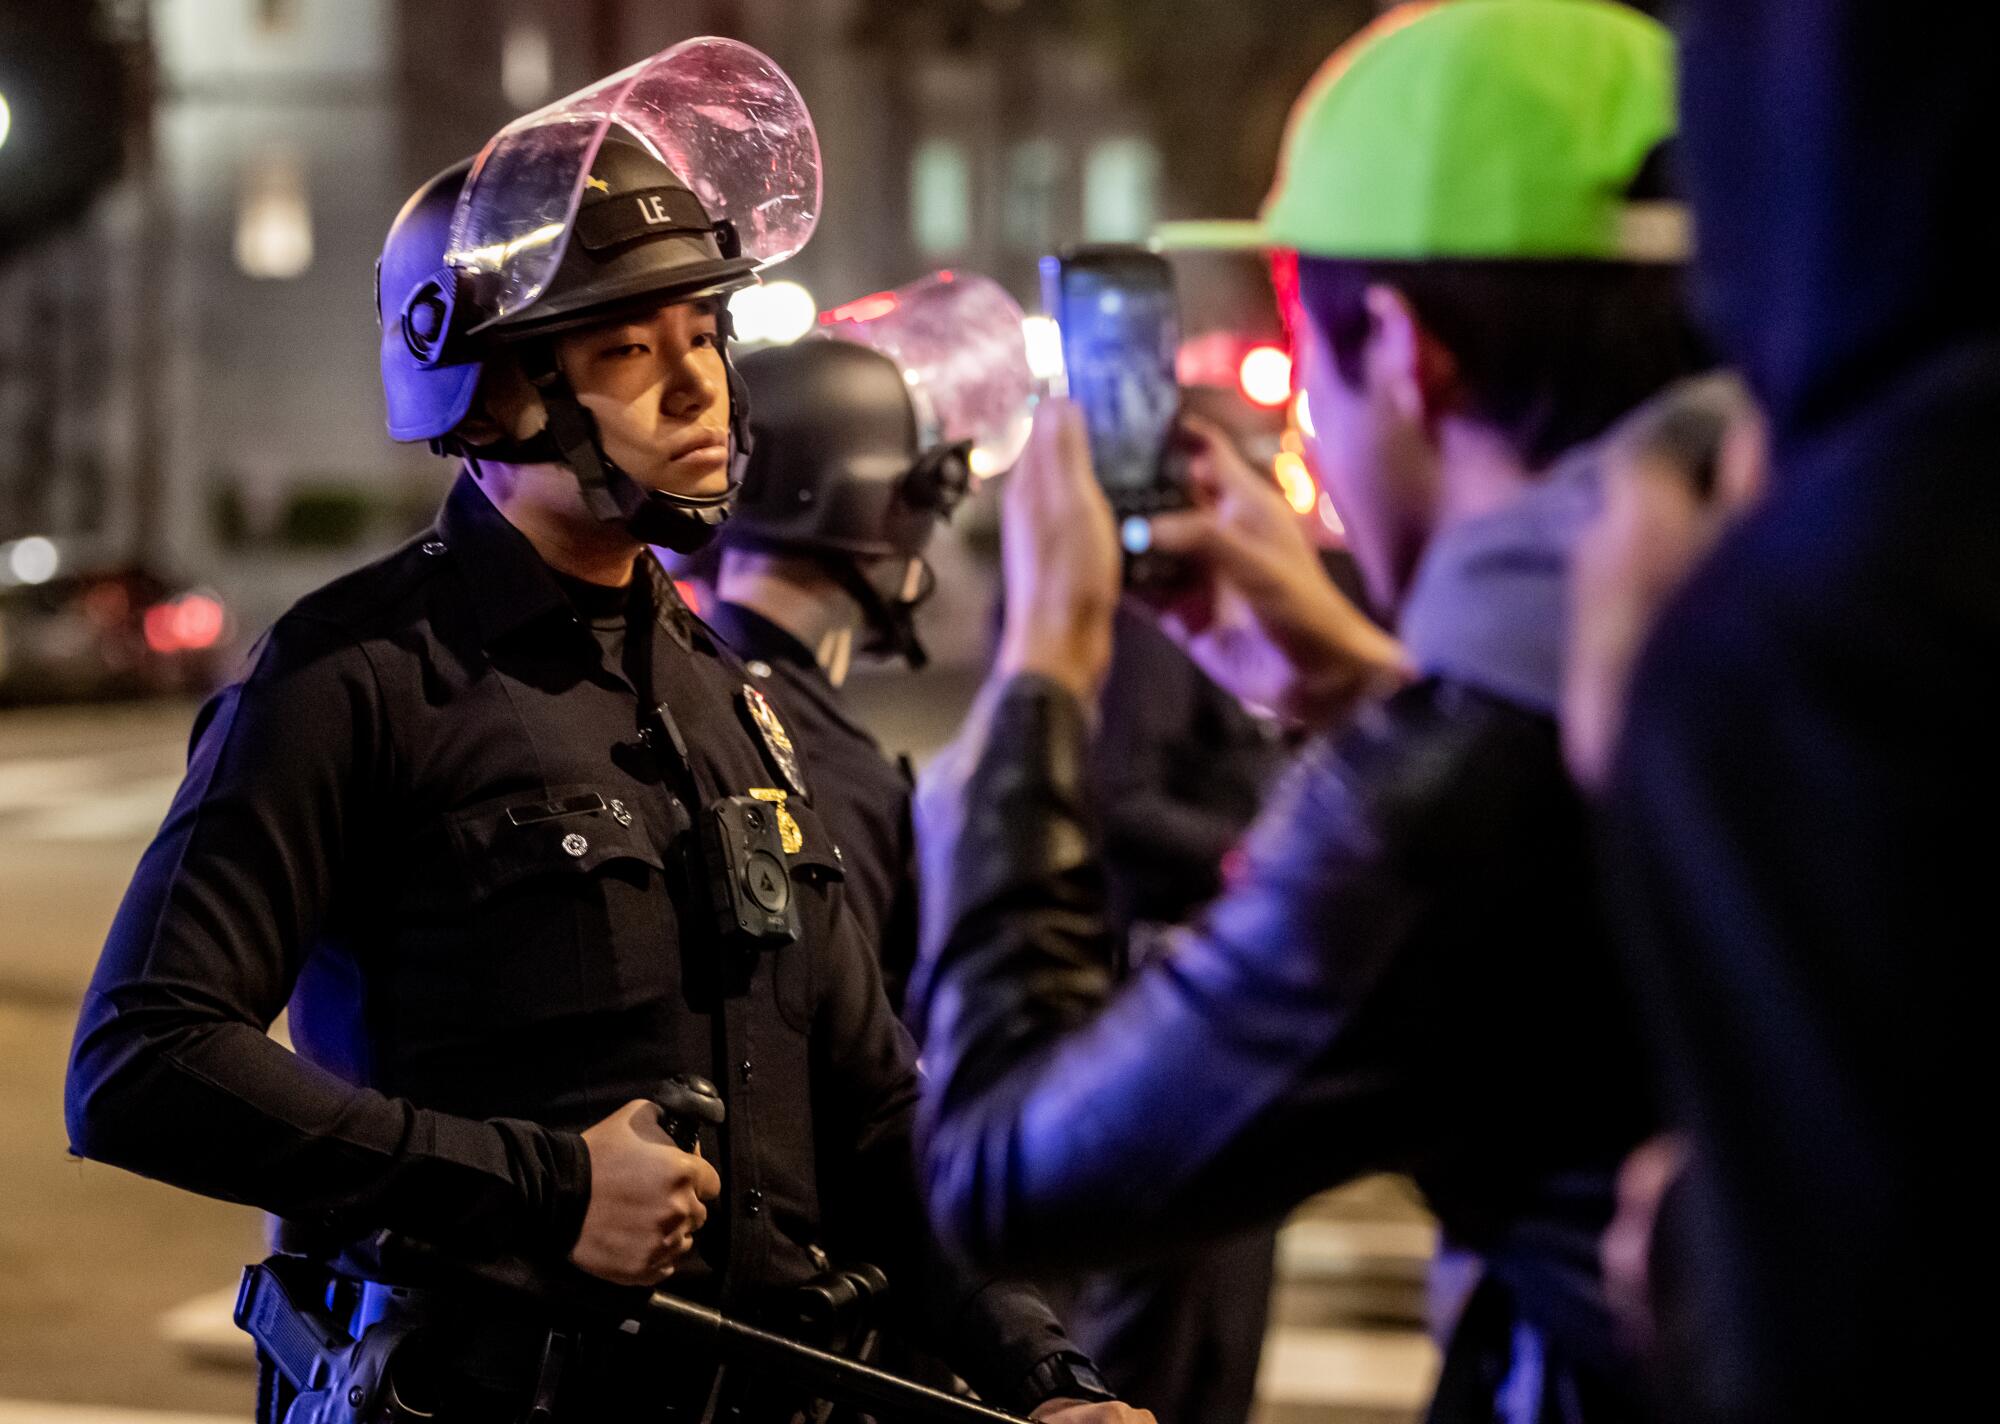 A protester confronts Los Angeles Police officers wearing riot gear.